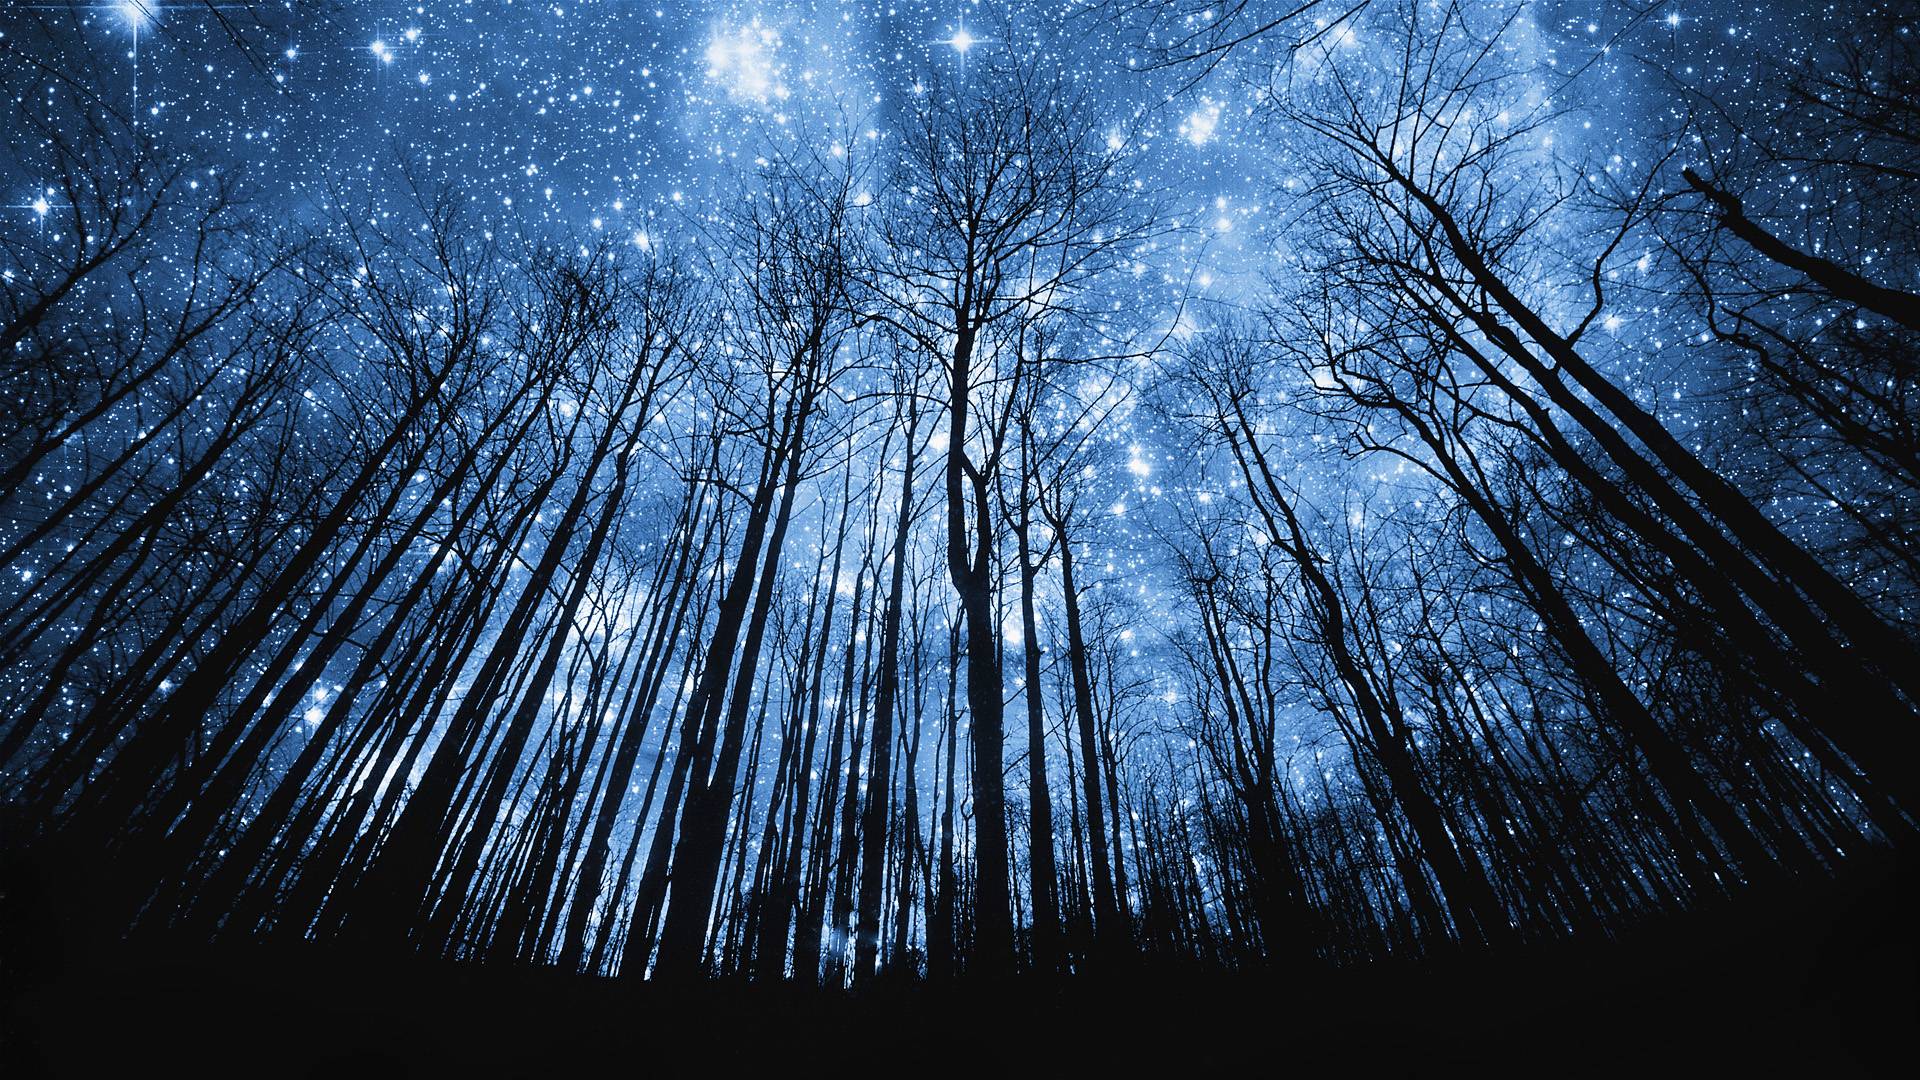 Starry Night Sky Wallpapers - Wallpaper Cave